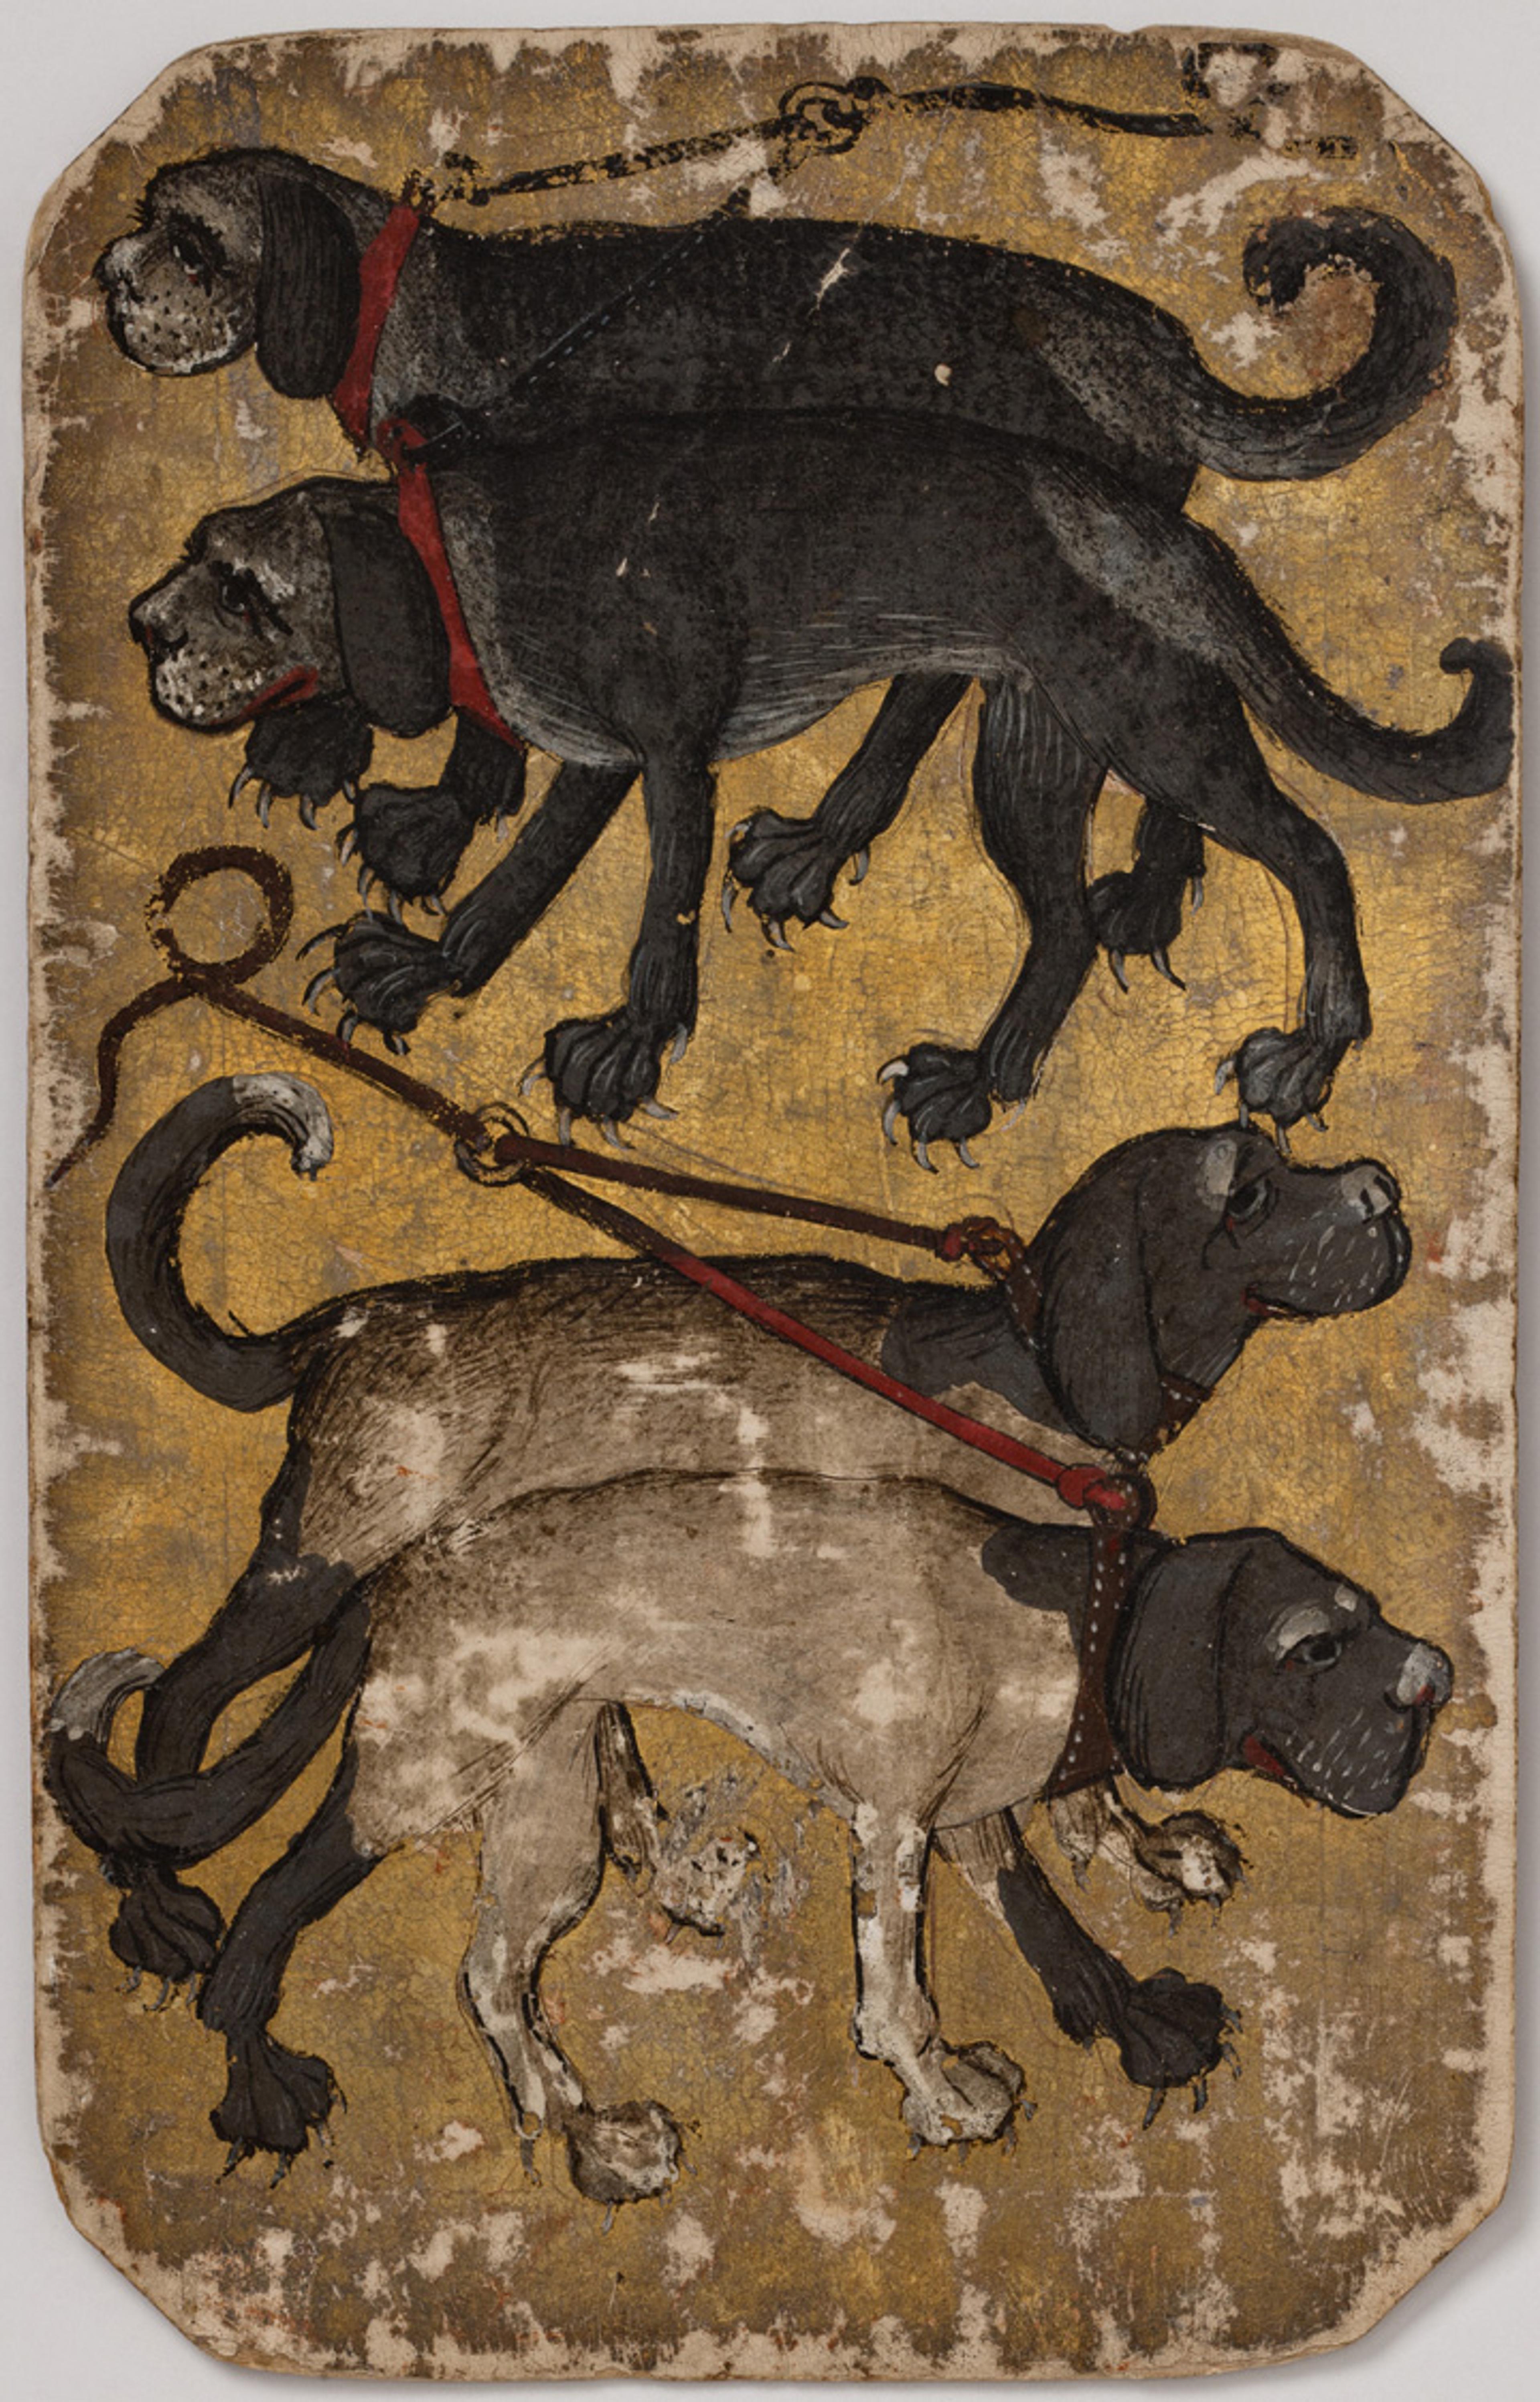 4 of Hounds, from The Stuttgart Playing Cards, ca. 1430. Made in Upper Rhineland, Germany. Paper (six layers in pasteboard) with gold ground and opaque paint over pen and ink; 7 1/2 x 4 3/4 in. (19.1 x 12.1 cm). Landesmuseum Württemberg, Stuttgart